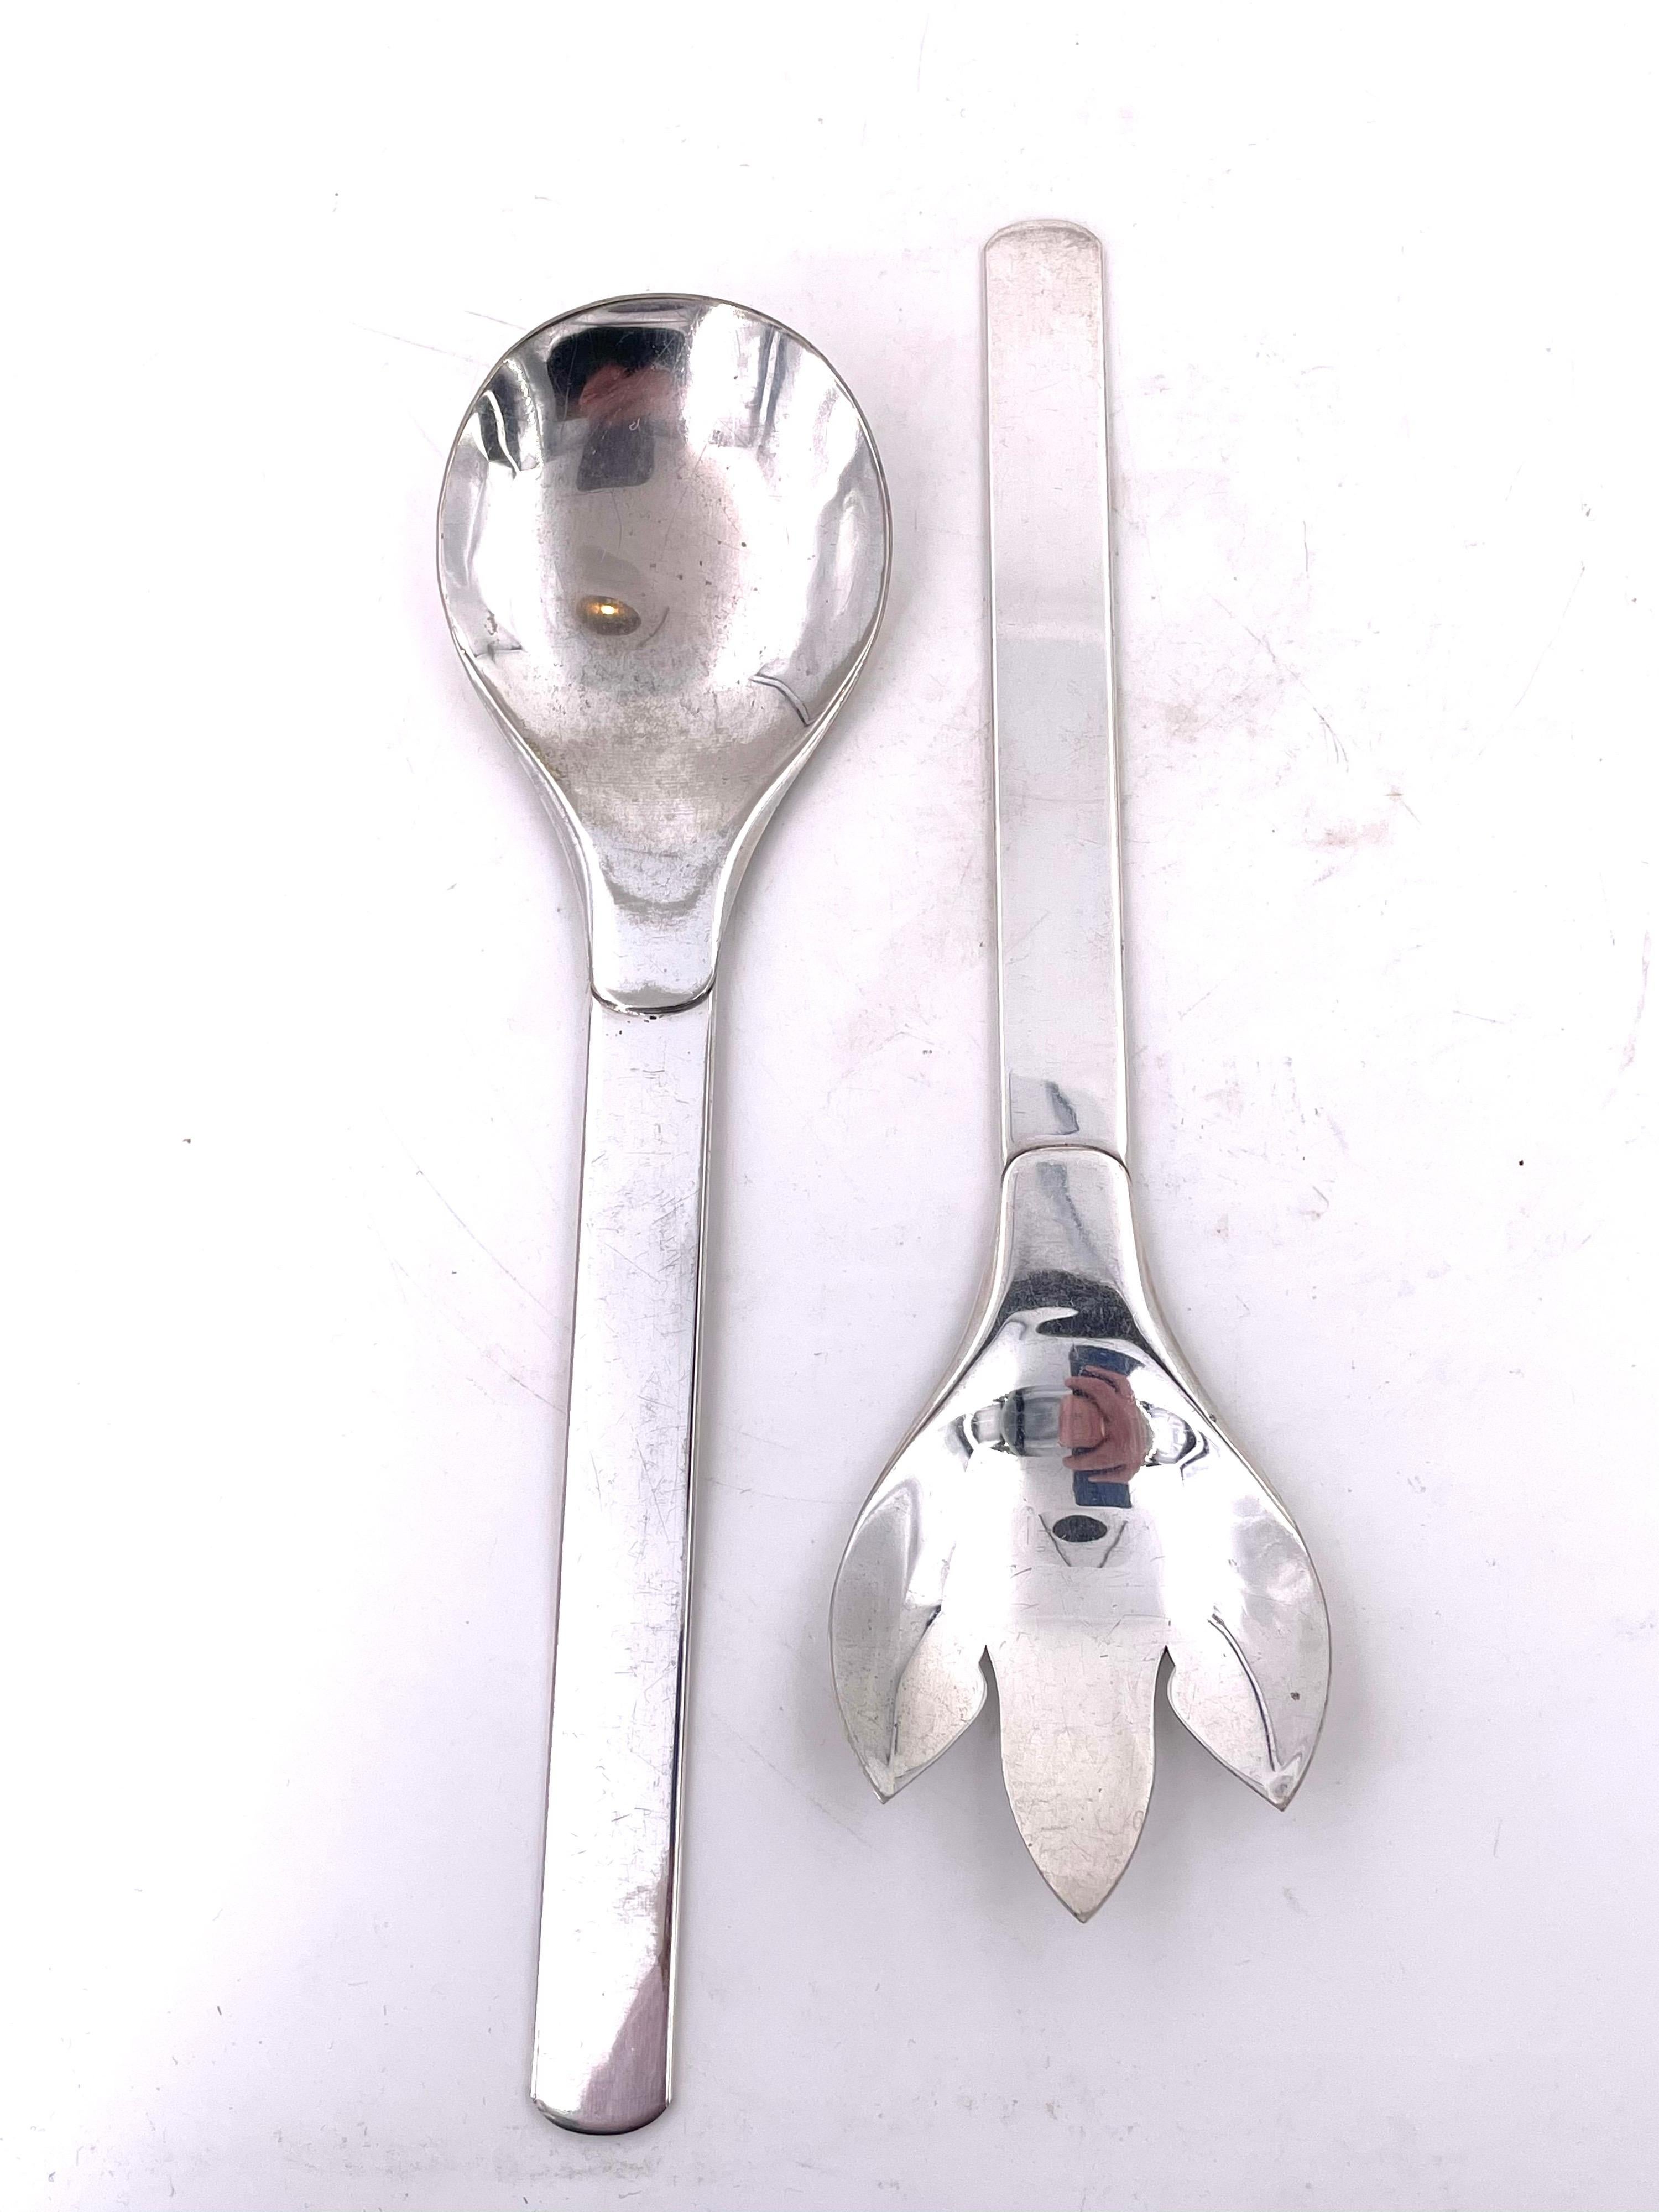 Beautiful design on these salad servers by Napier, circa 1980s.